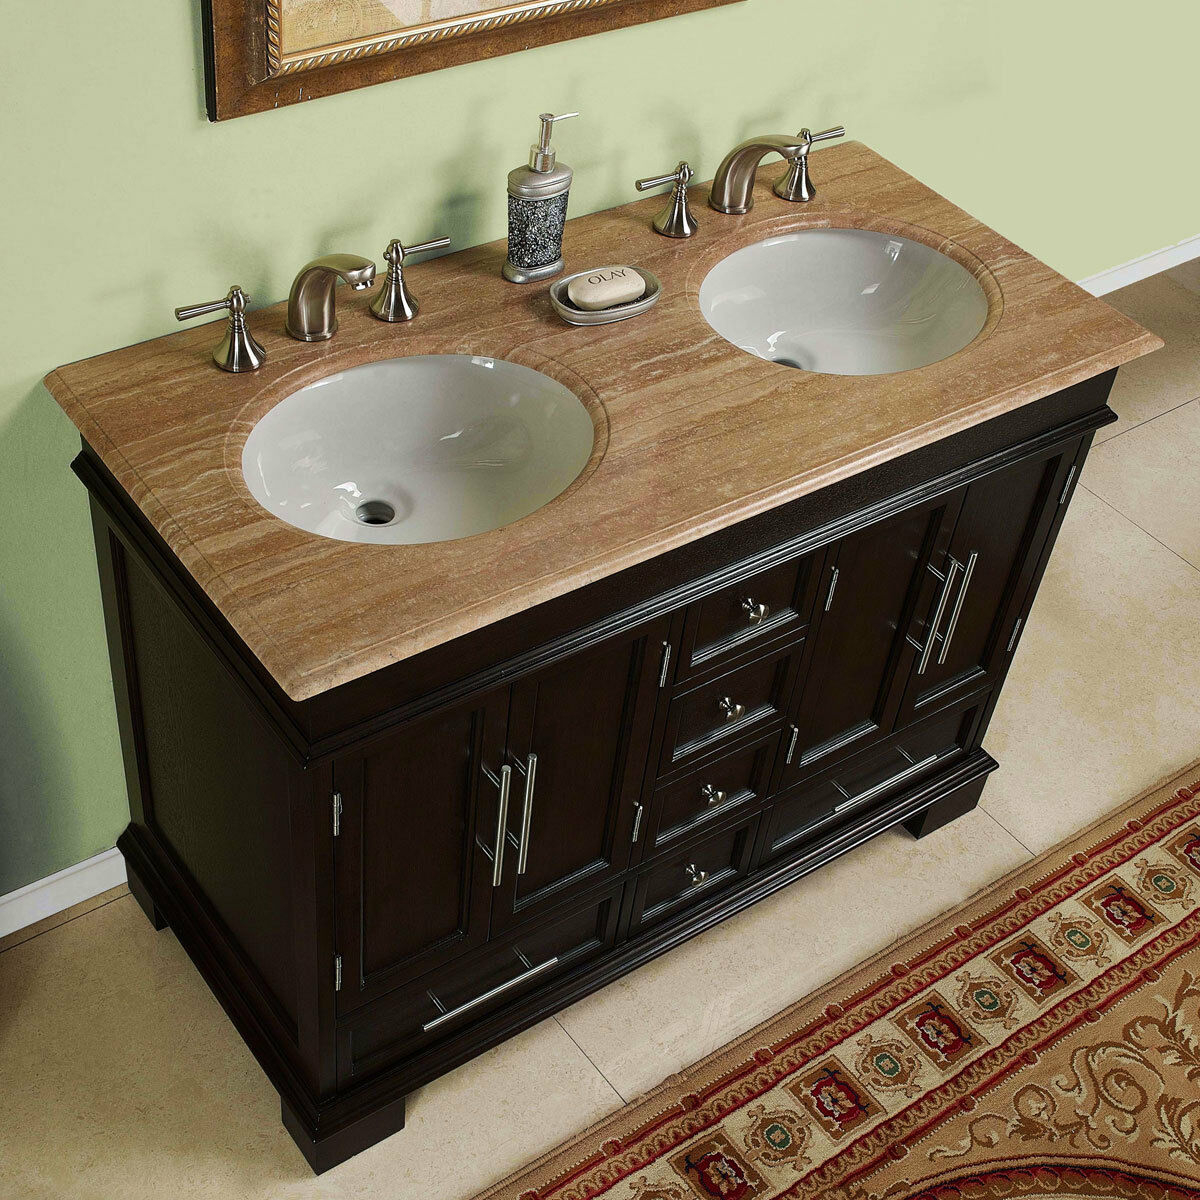 Small Double Bathroom Sink Visualhunt, Can A 48 Vanity Have 2 Sinks